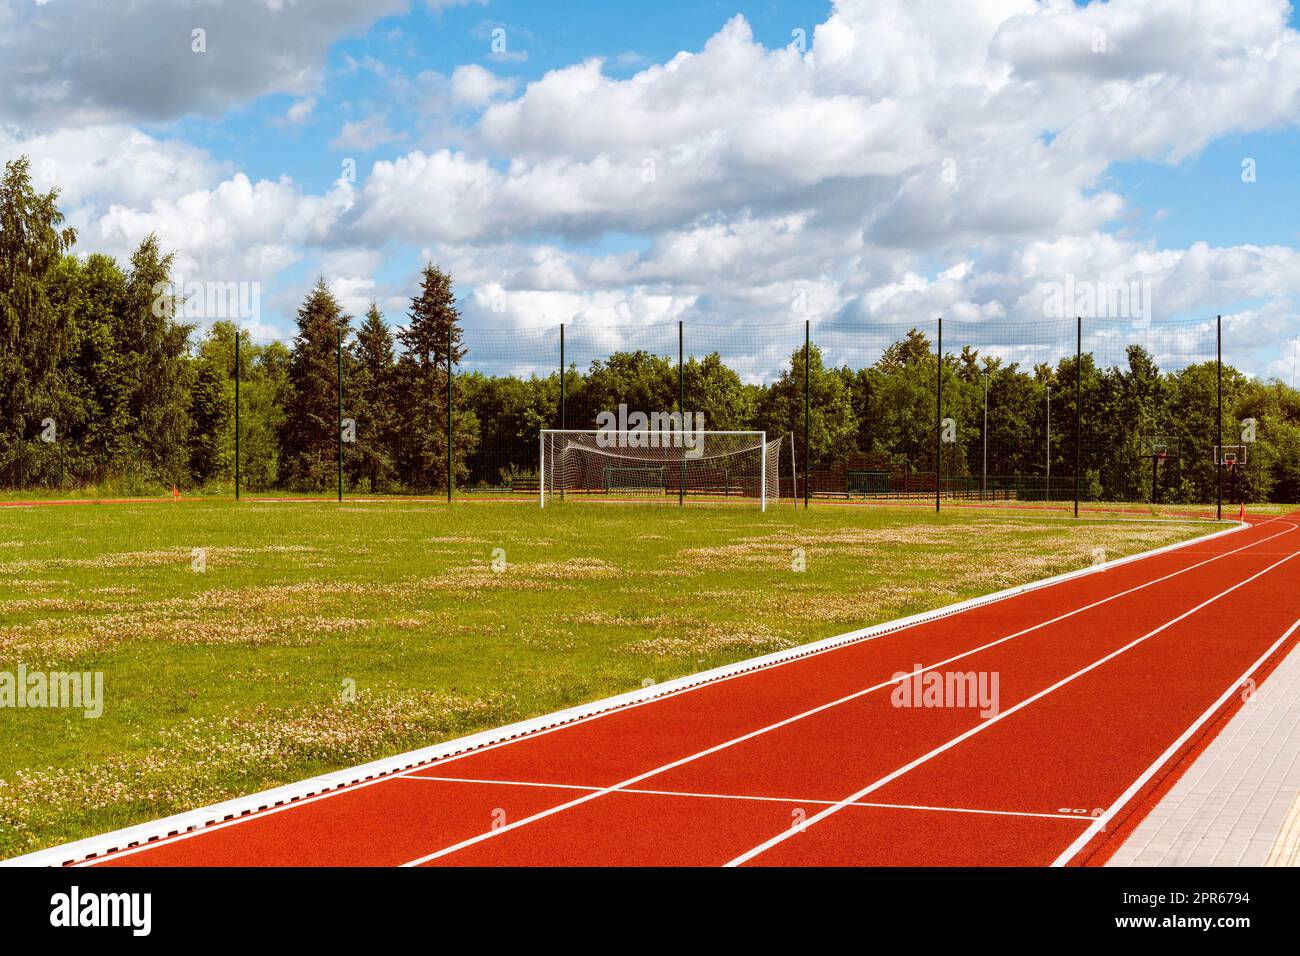 Empty school stadium with football gate and running track Stock Photo